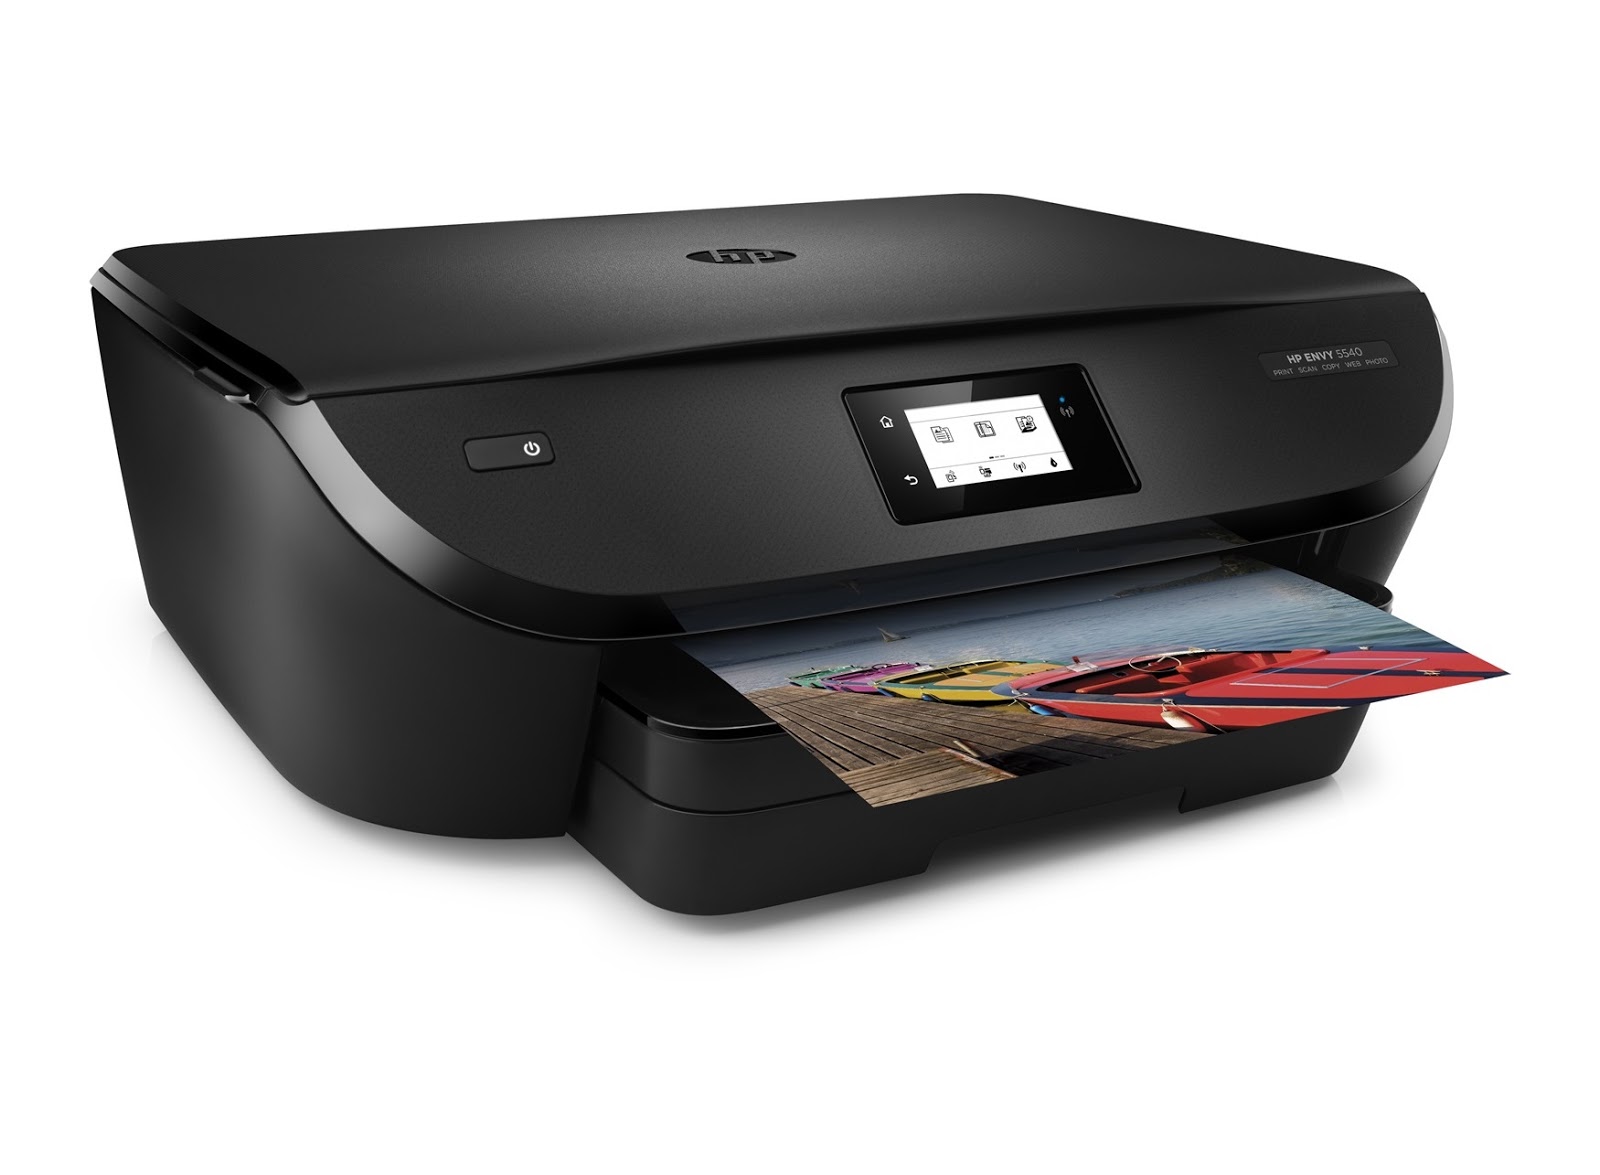 Hp Envy 5530 E-all-in-one Printer Software For Mac